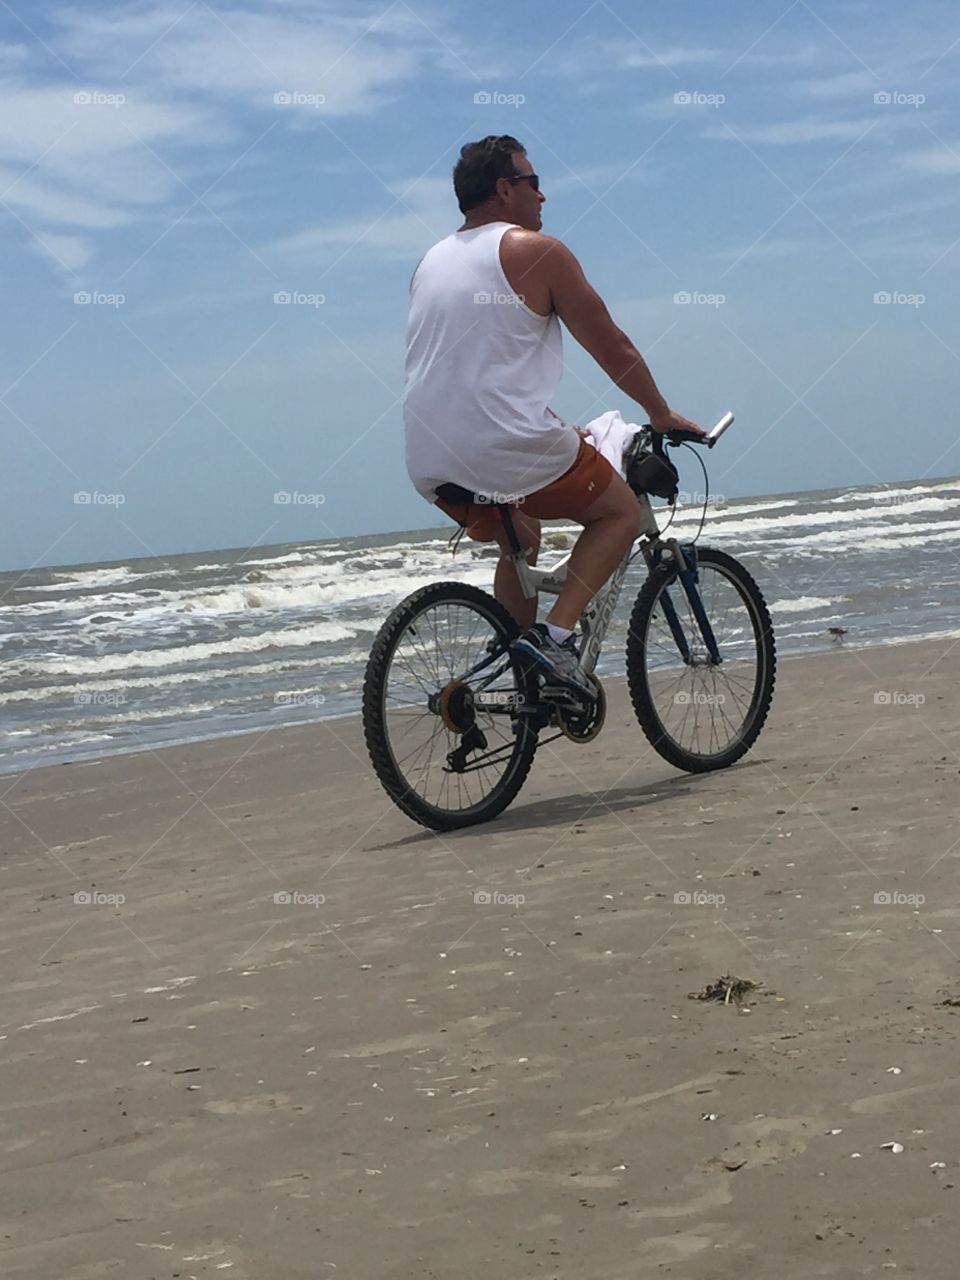 Cycling on the beach 